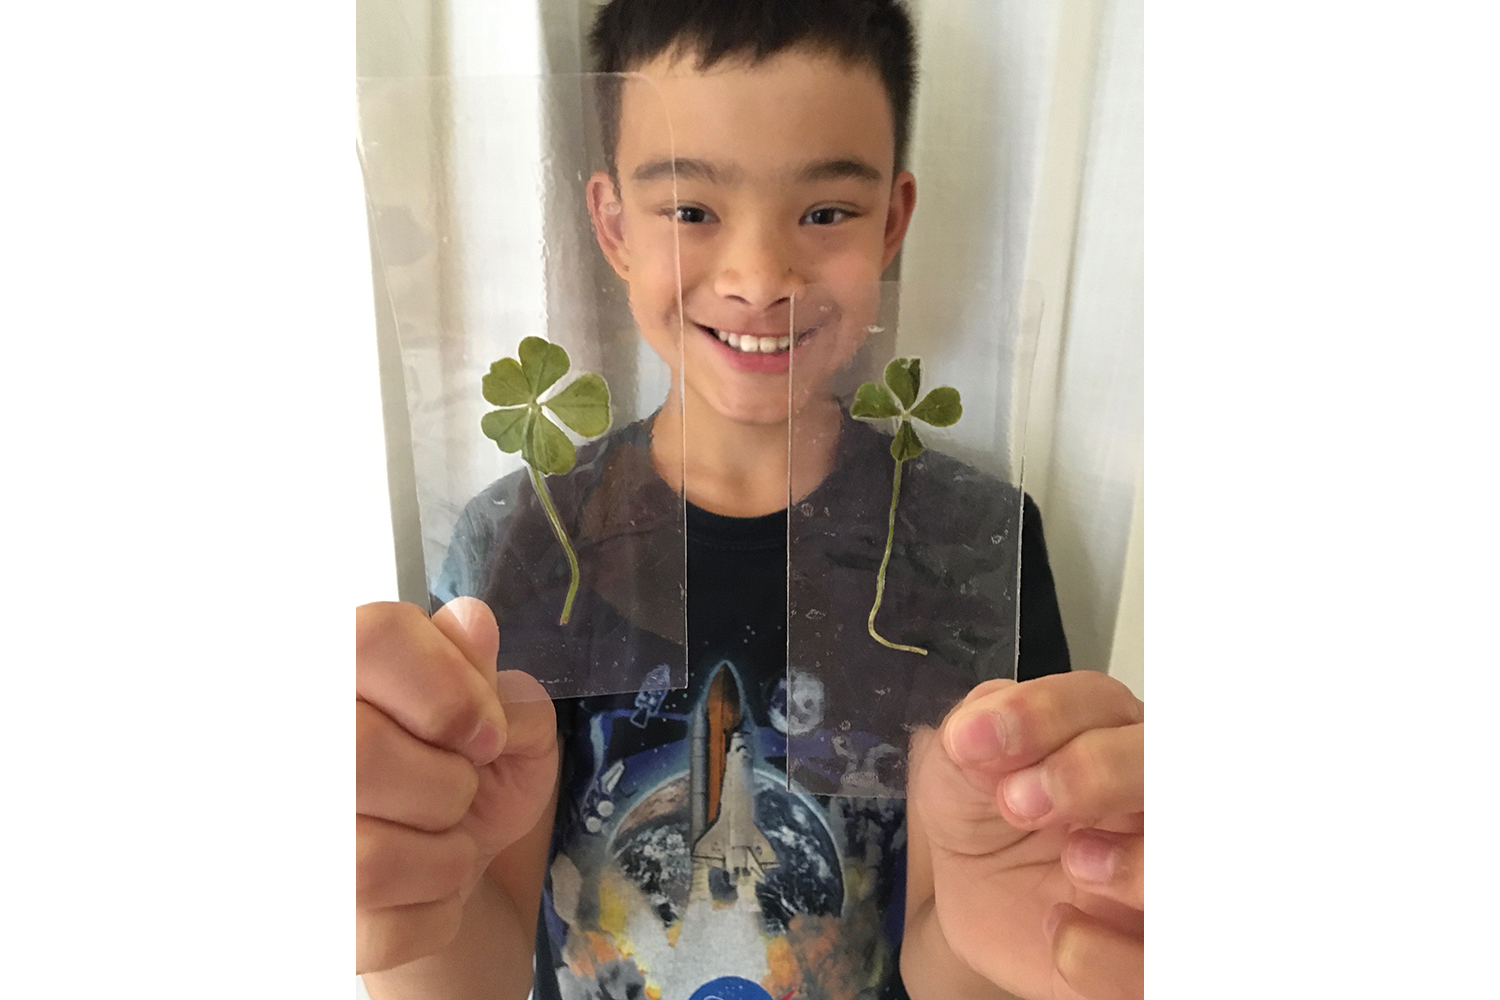 Finding more than luck in four-leaf clovers